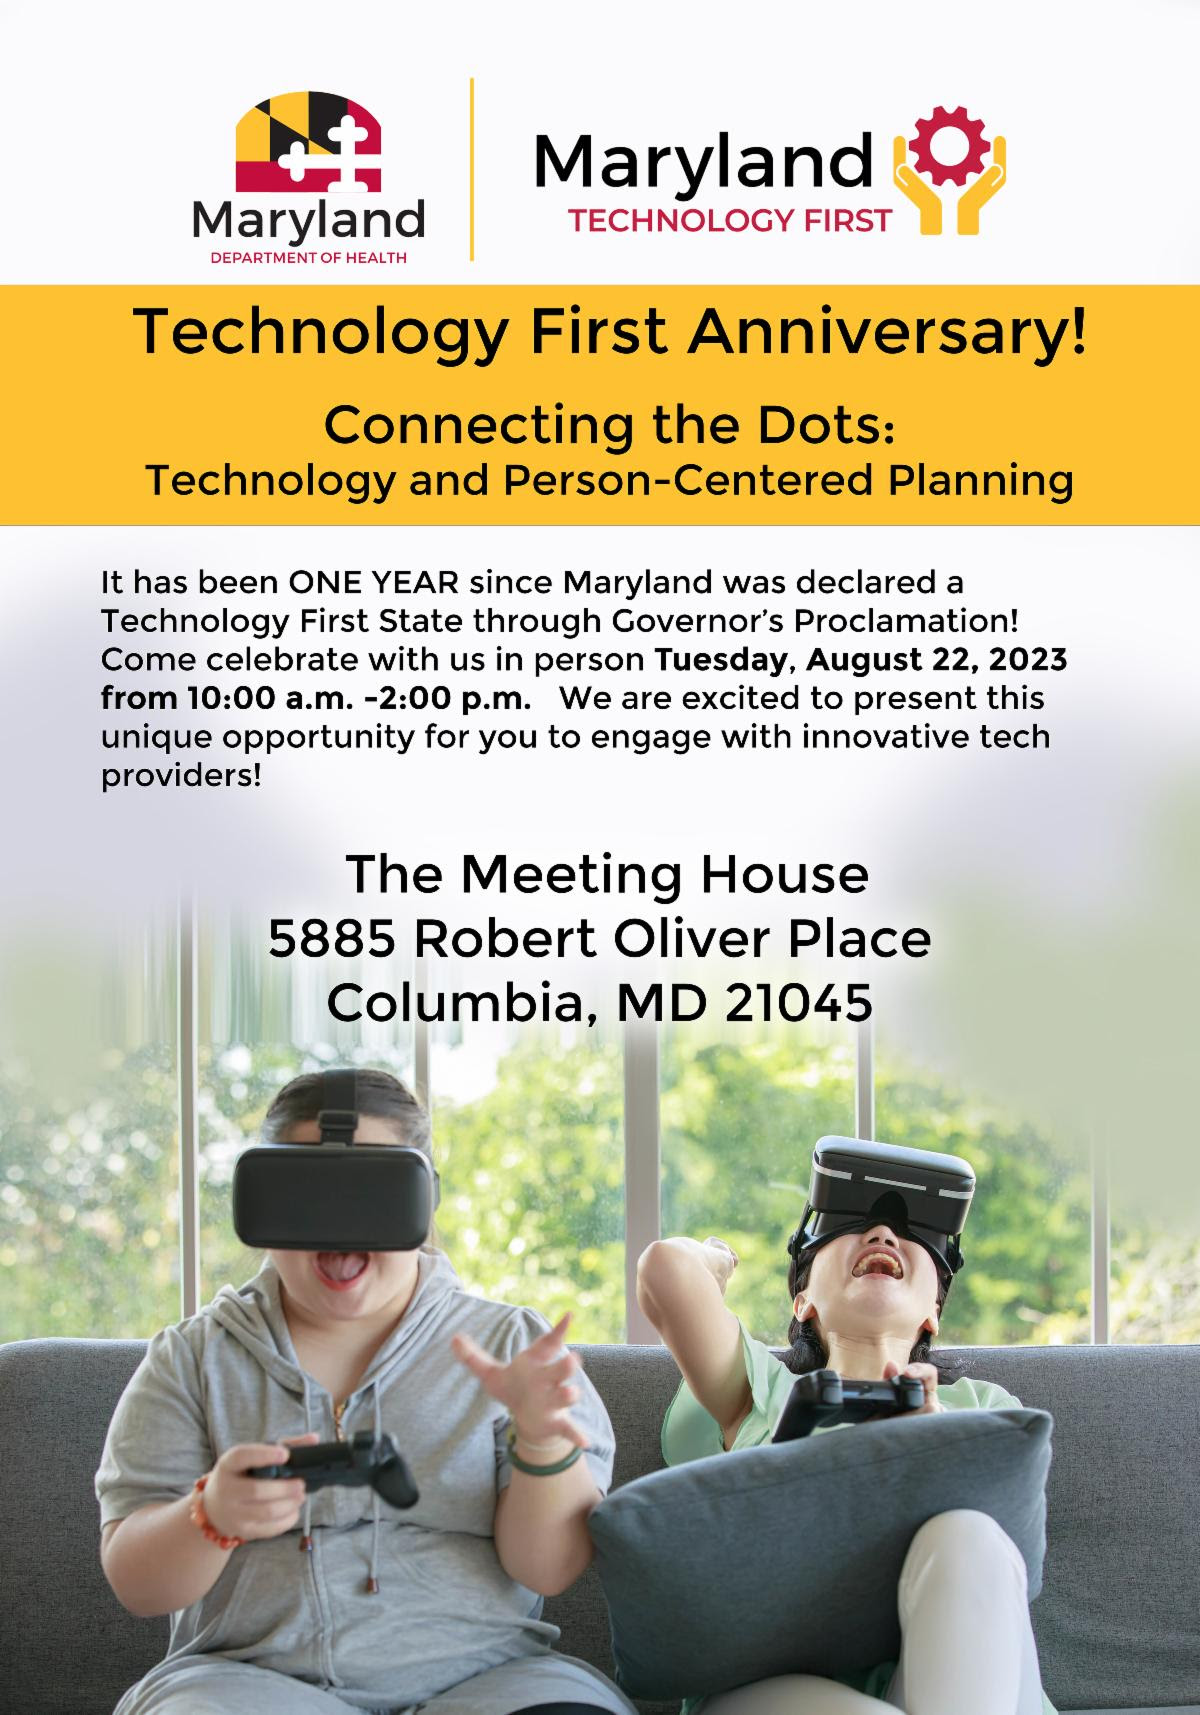 Maryland Department of Health Logo - Maryland Technology First Logo
Technology First Anniversary! Connecting the Dots: Technology and Person-Centered Planning.
It has been ONE YEAR since Maryland was declared a Technology First State through Governor's proclamation! Come celebrate with us in person Tuesday, August 22, 2023 from 10:00am-2:00pm. We are excited to present this unique opportunity for you to engage with innovative tech providers!
The Meeting House 5885 Robert Oliver Place Columbia, MD 21045

Two people sit on a couch and play a virtual reality video game